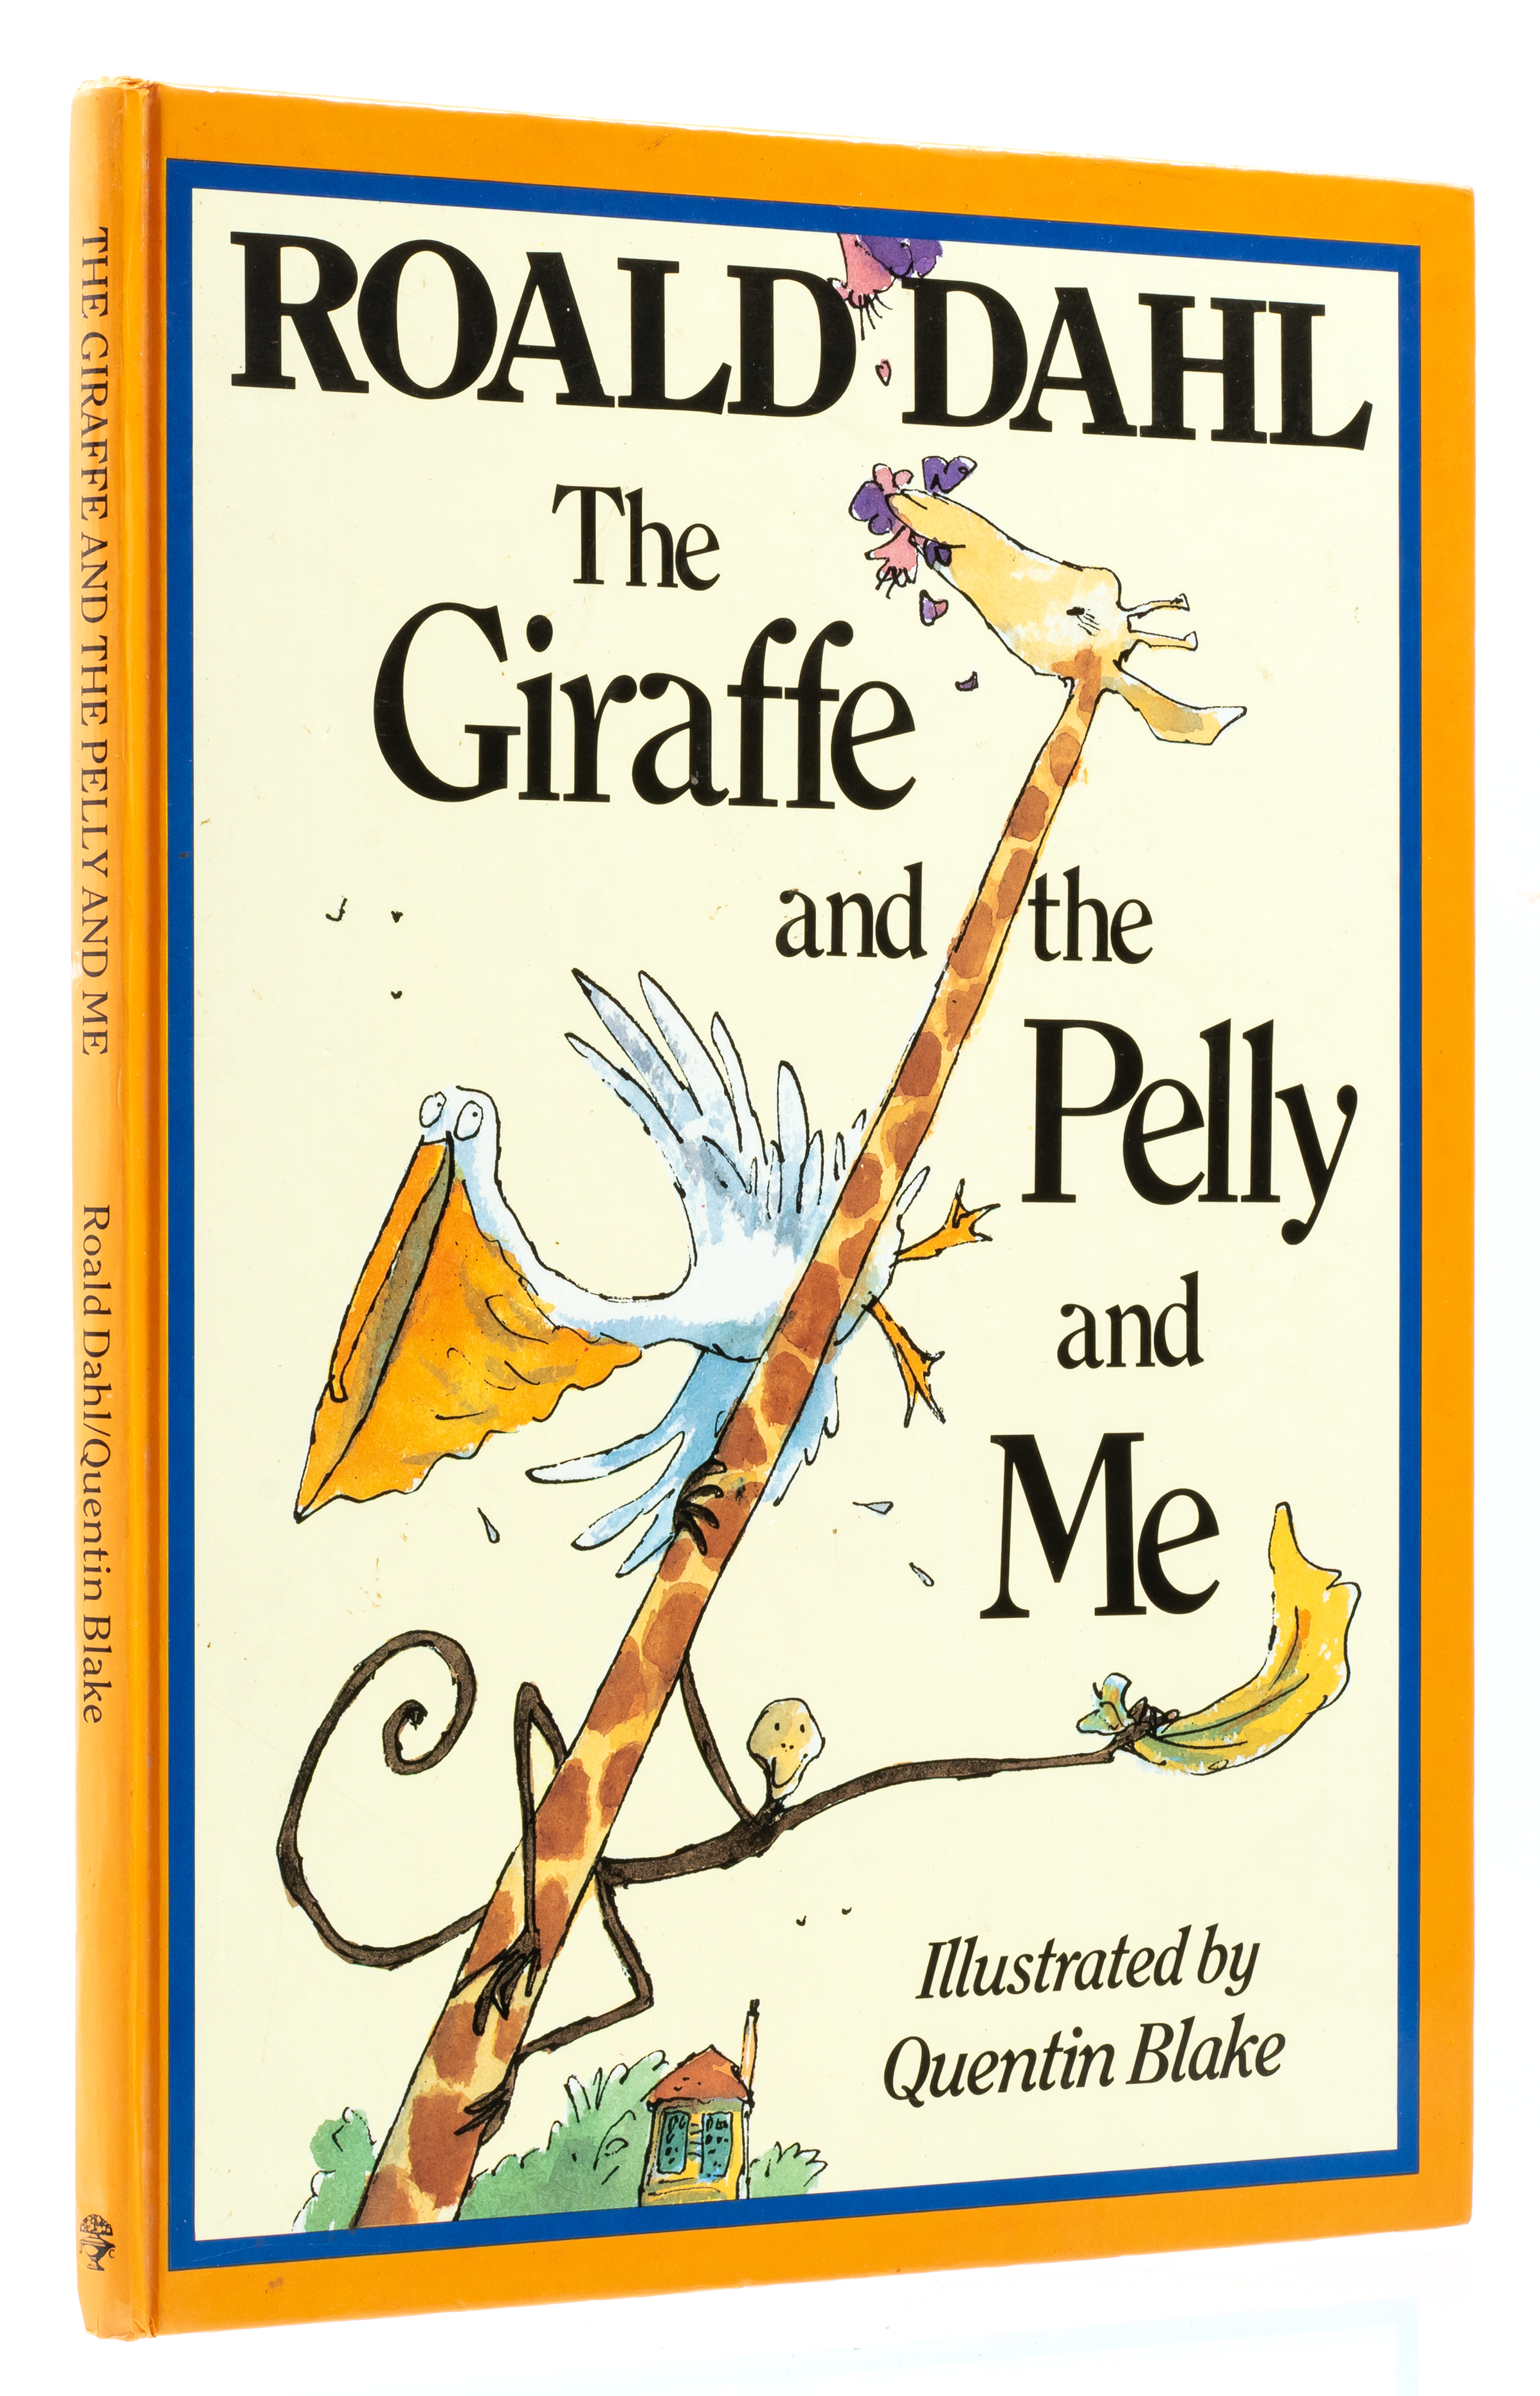 Dahl (Roald) The Giraffe and the Pelly and Me, first edition, cut signatures of Dahl and Blake on...